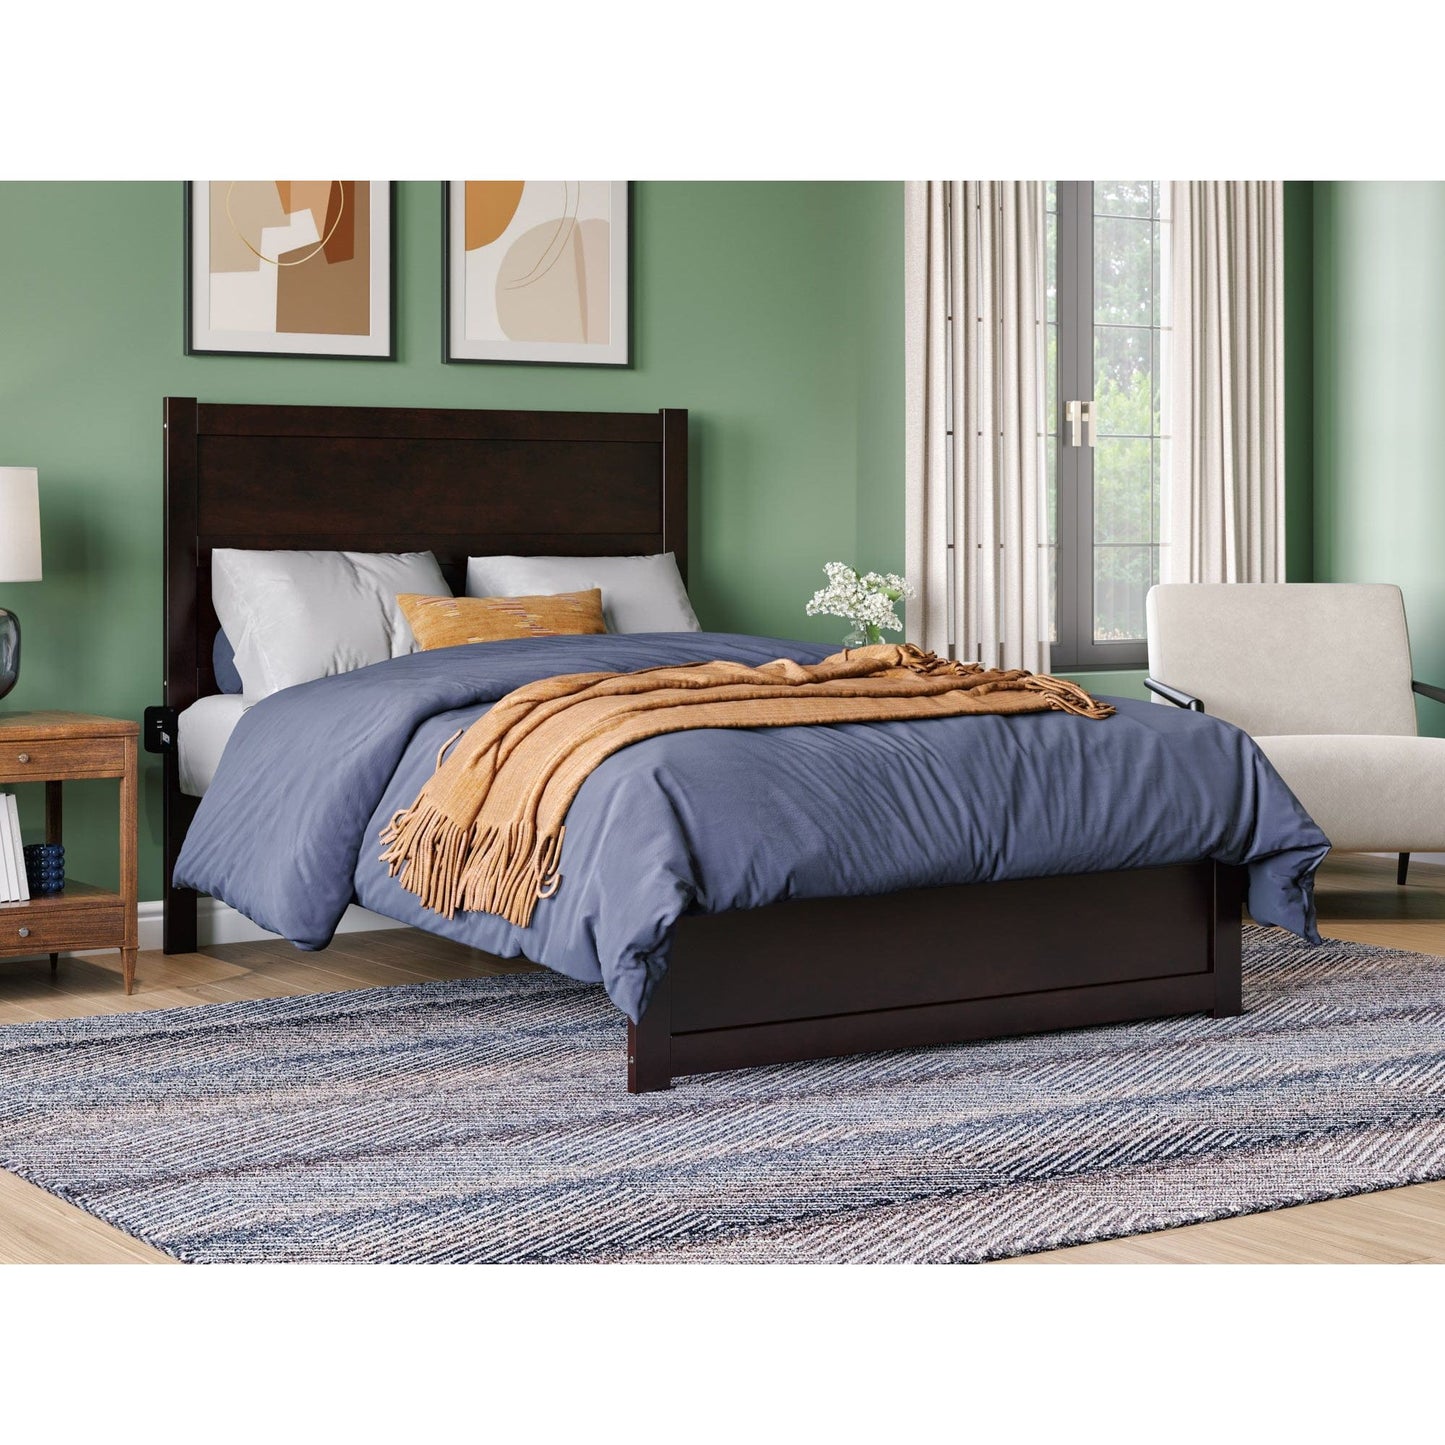 AFI Furnishings NoHo Full Bed with Footboard in Espresso AG9160031